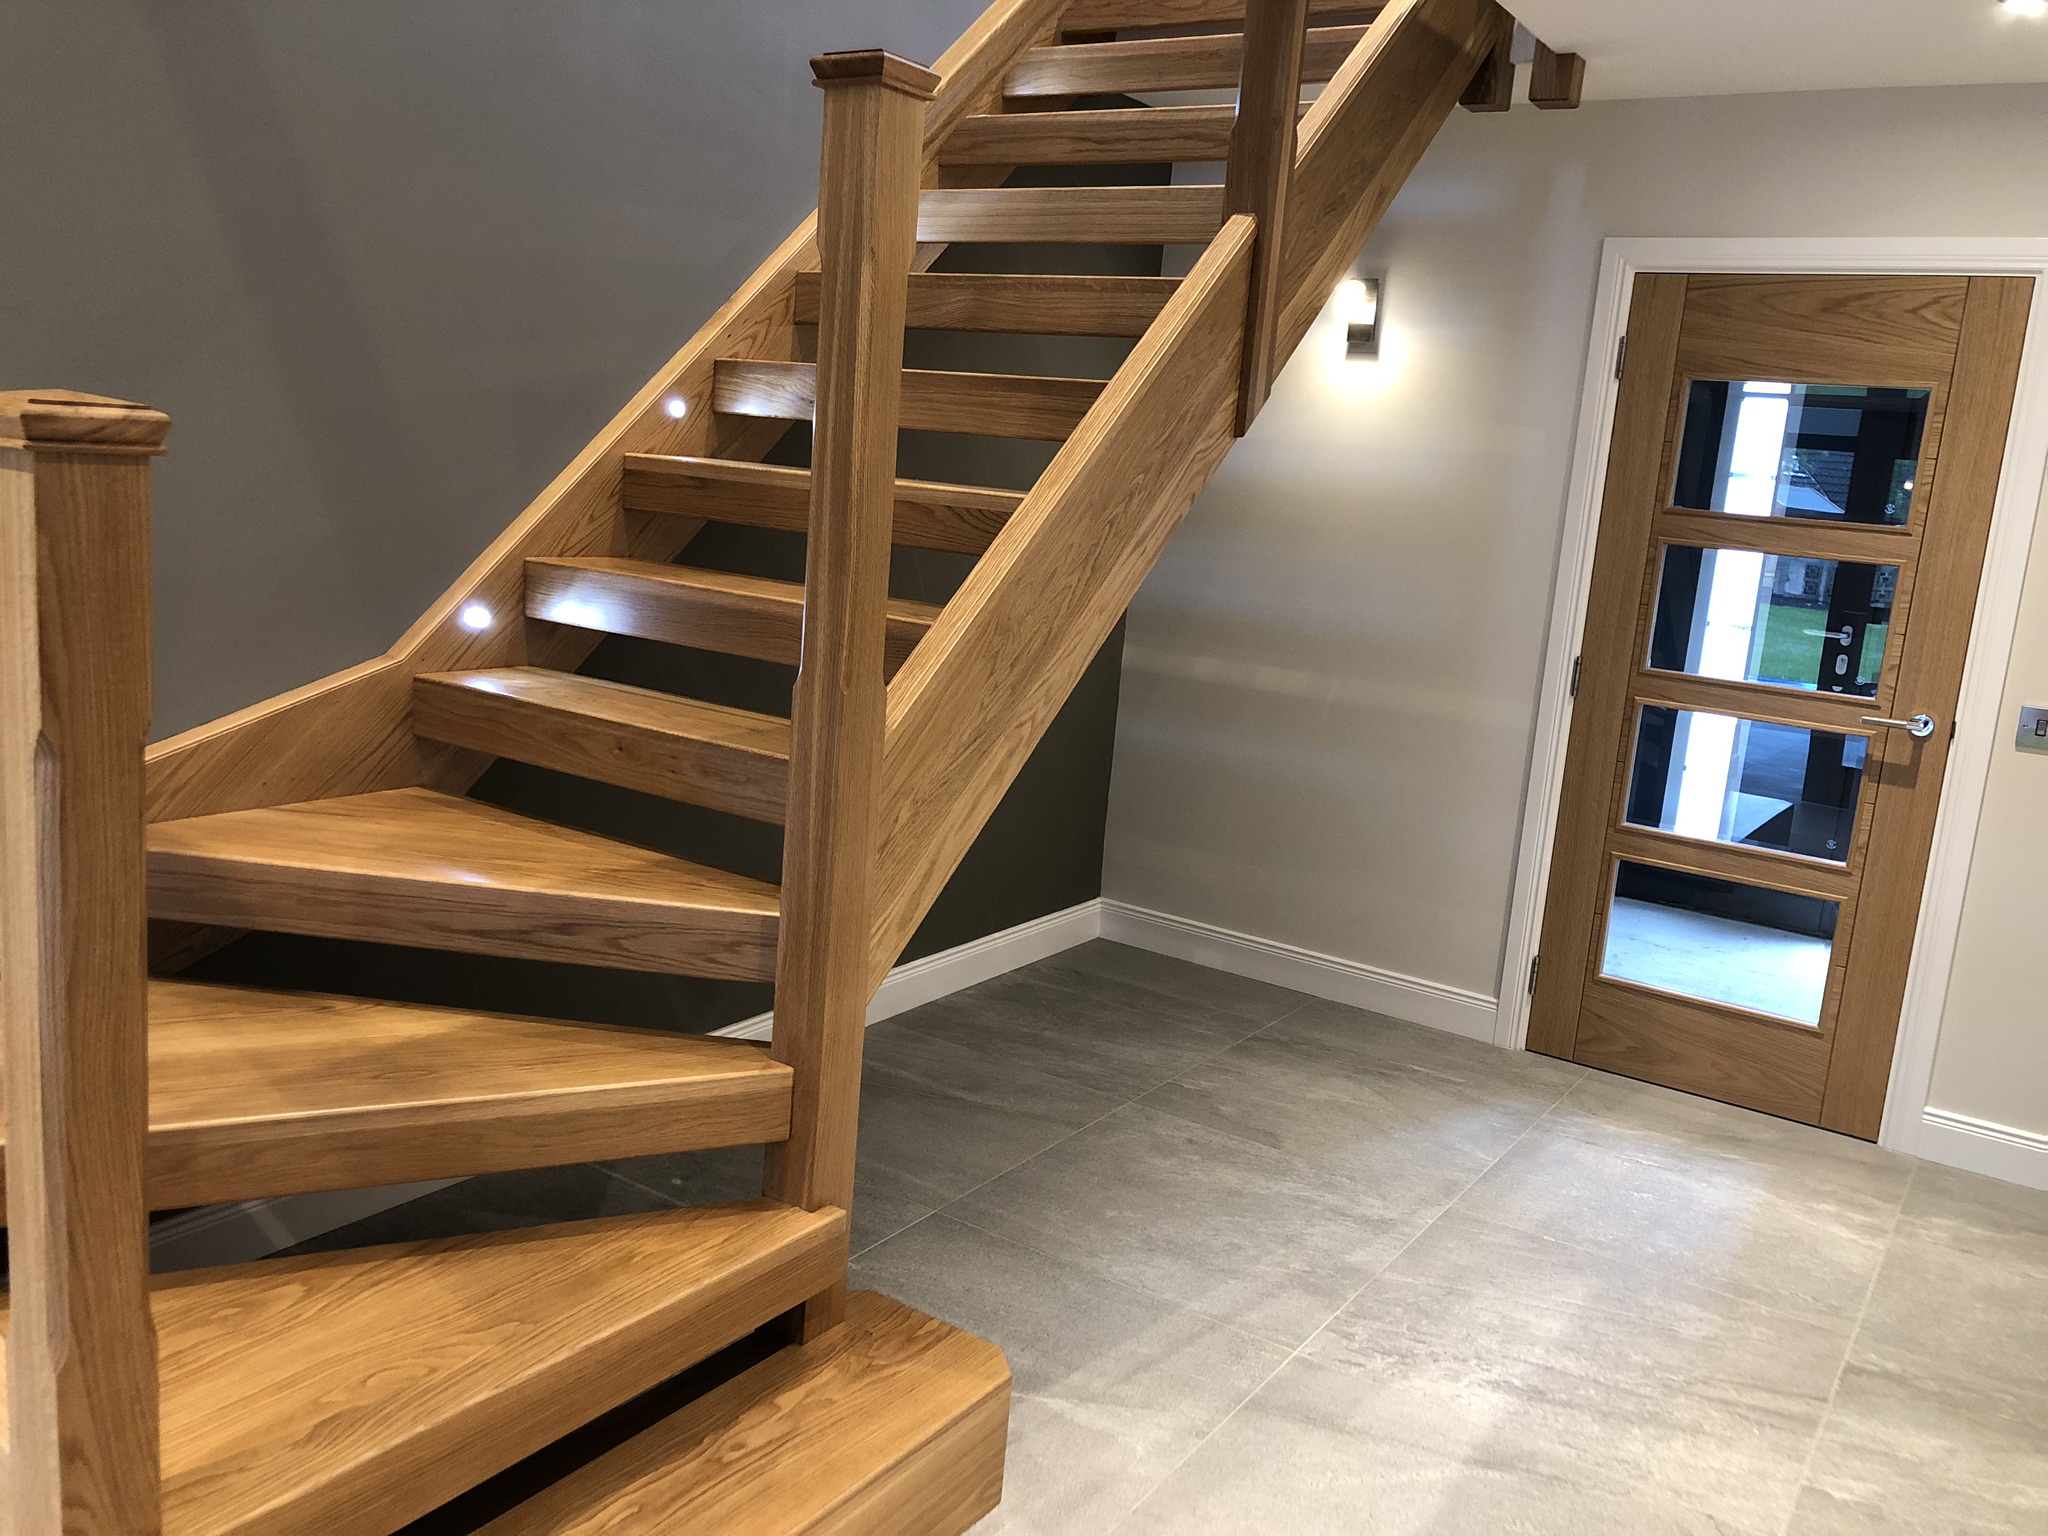 CMJ Aberdeen provide a complete managed joinery and interiors service